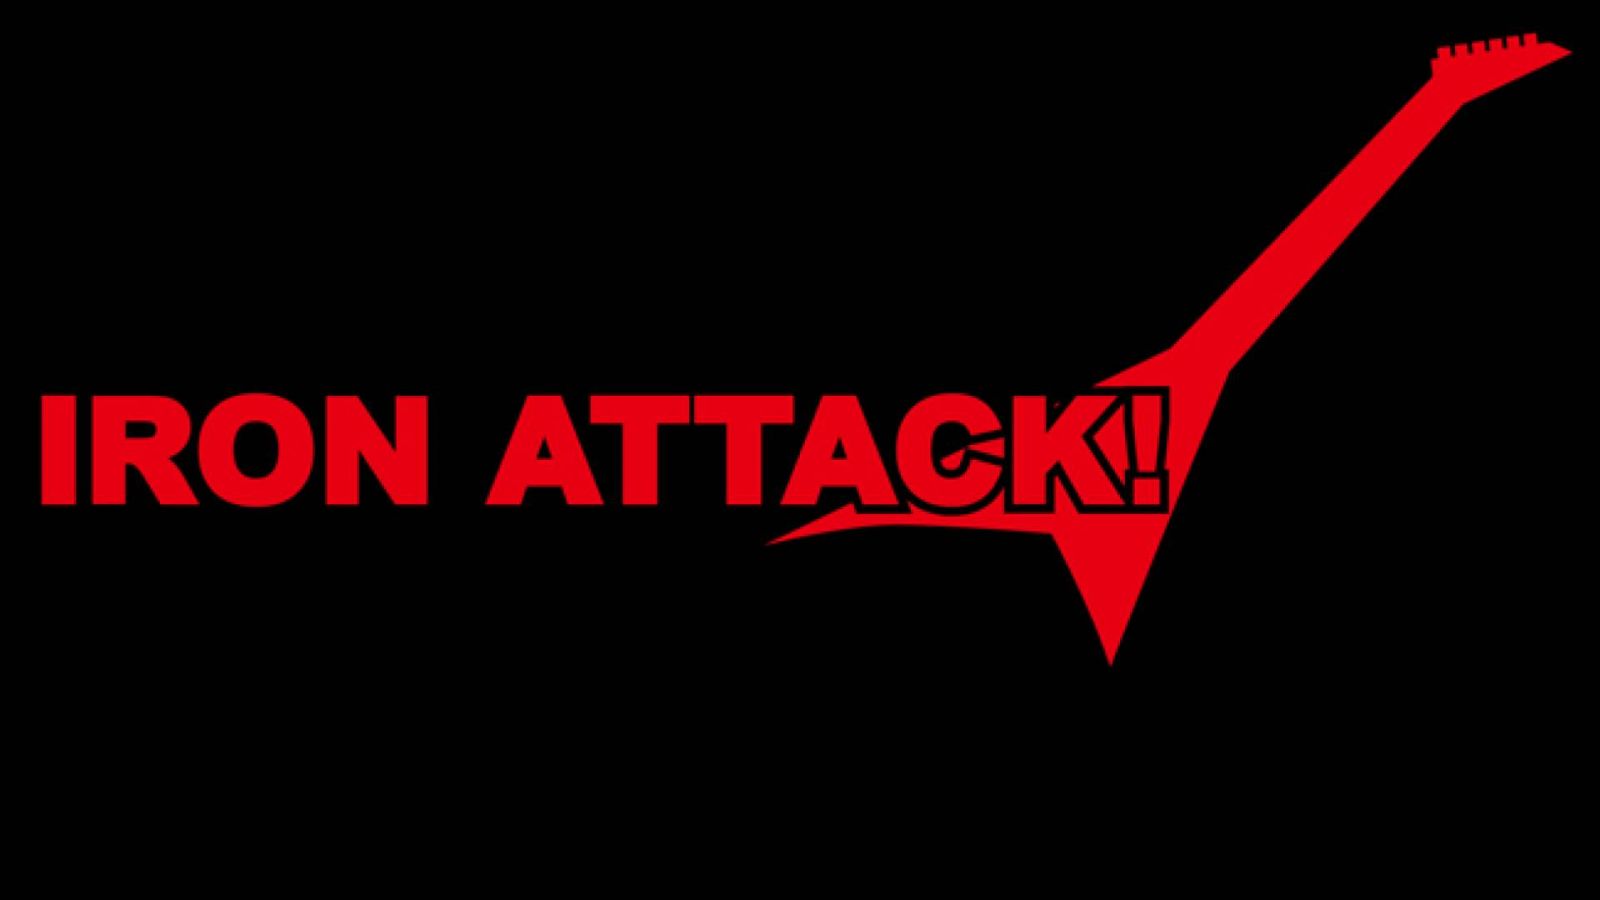 New Albums from IRON ATTACK! © 2015 IRON ATTACK! All rights reserved.